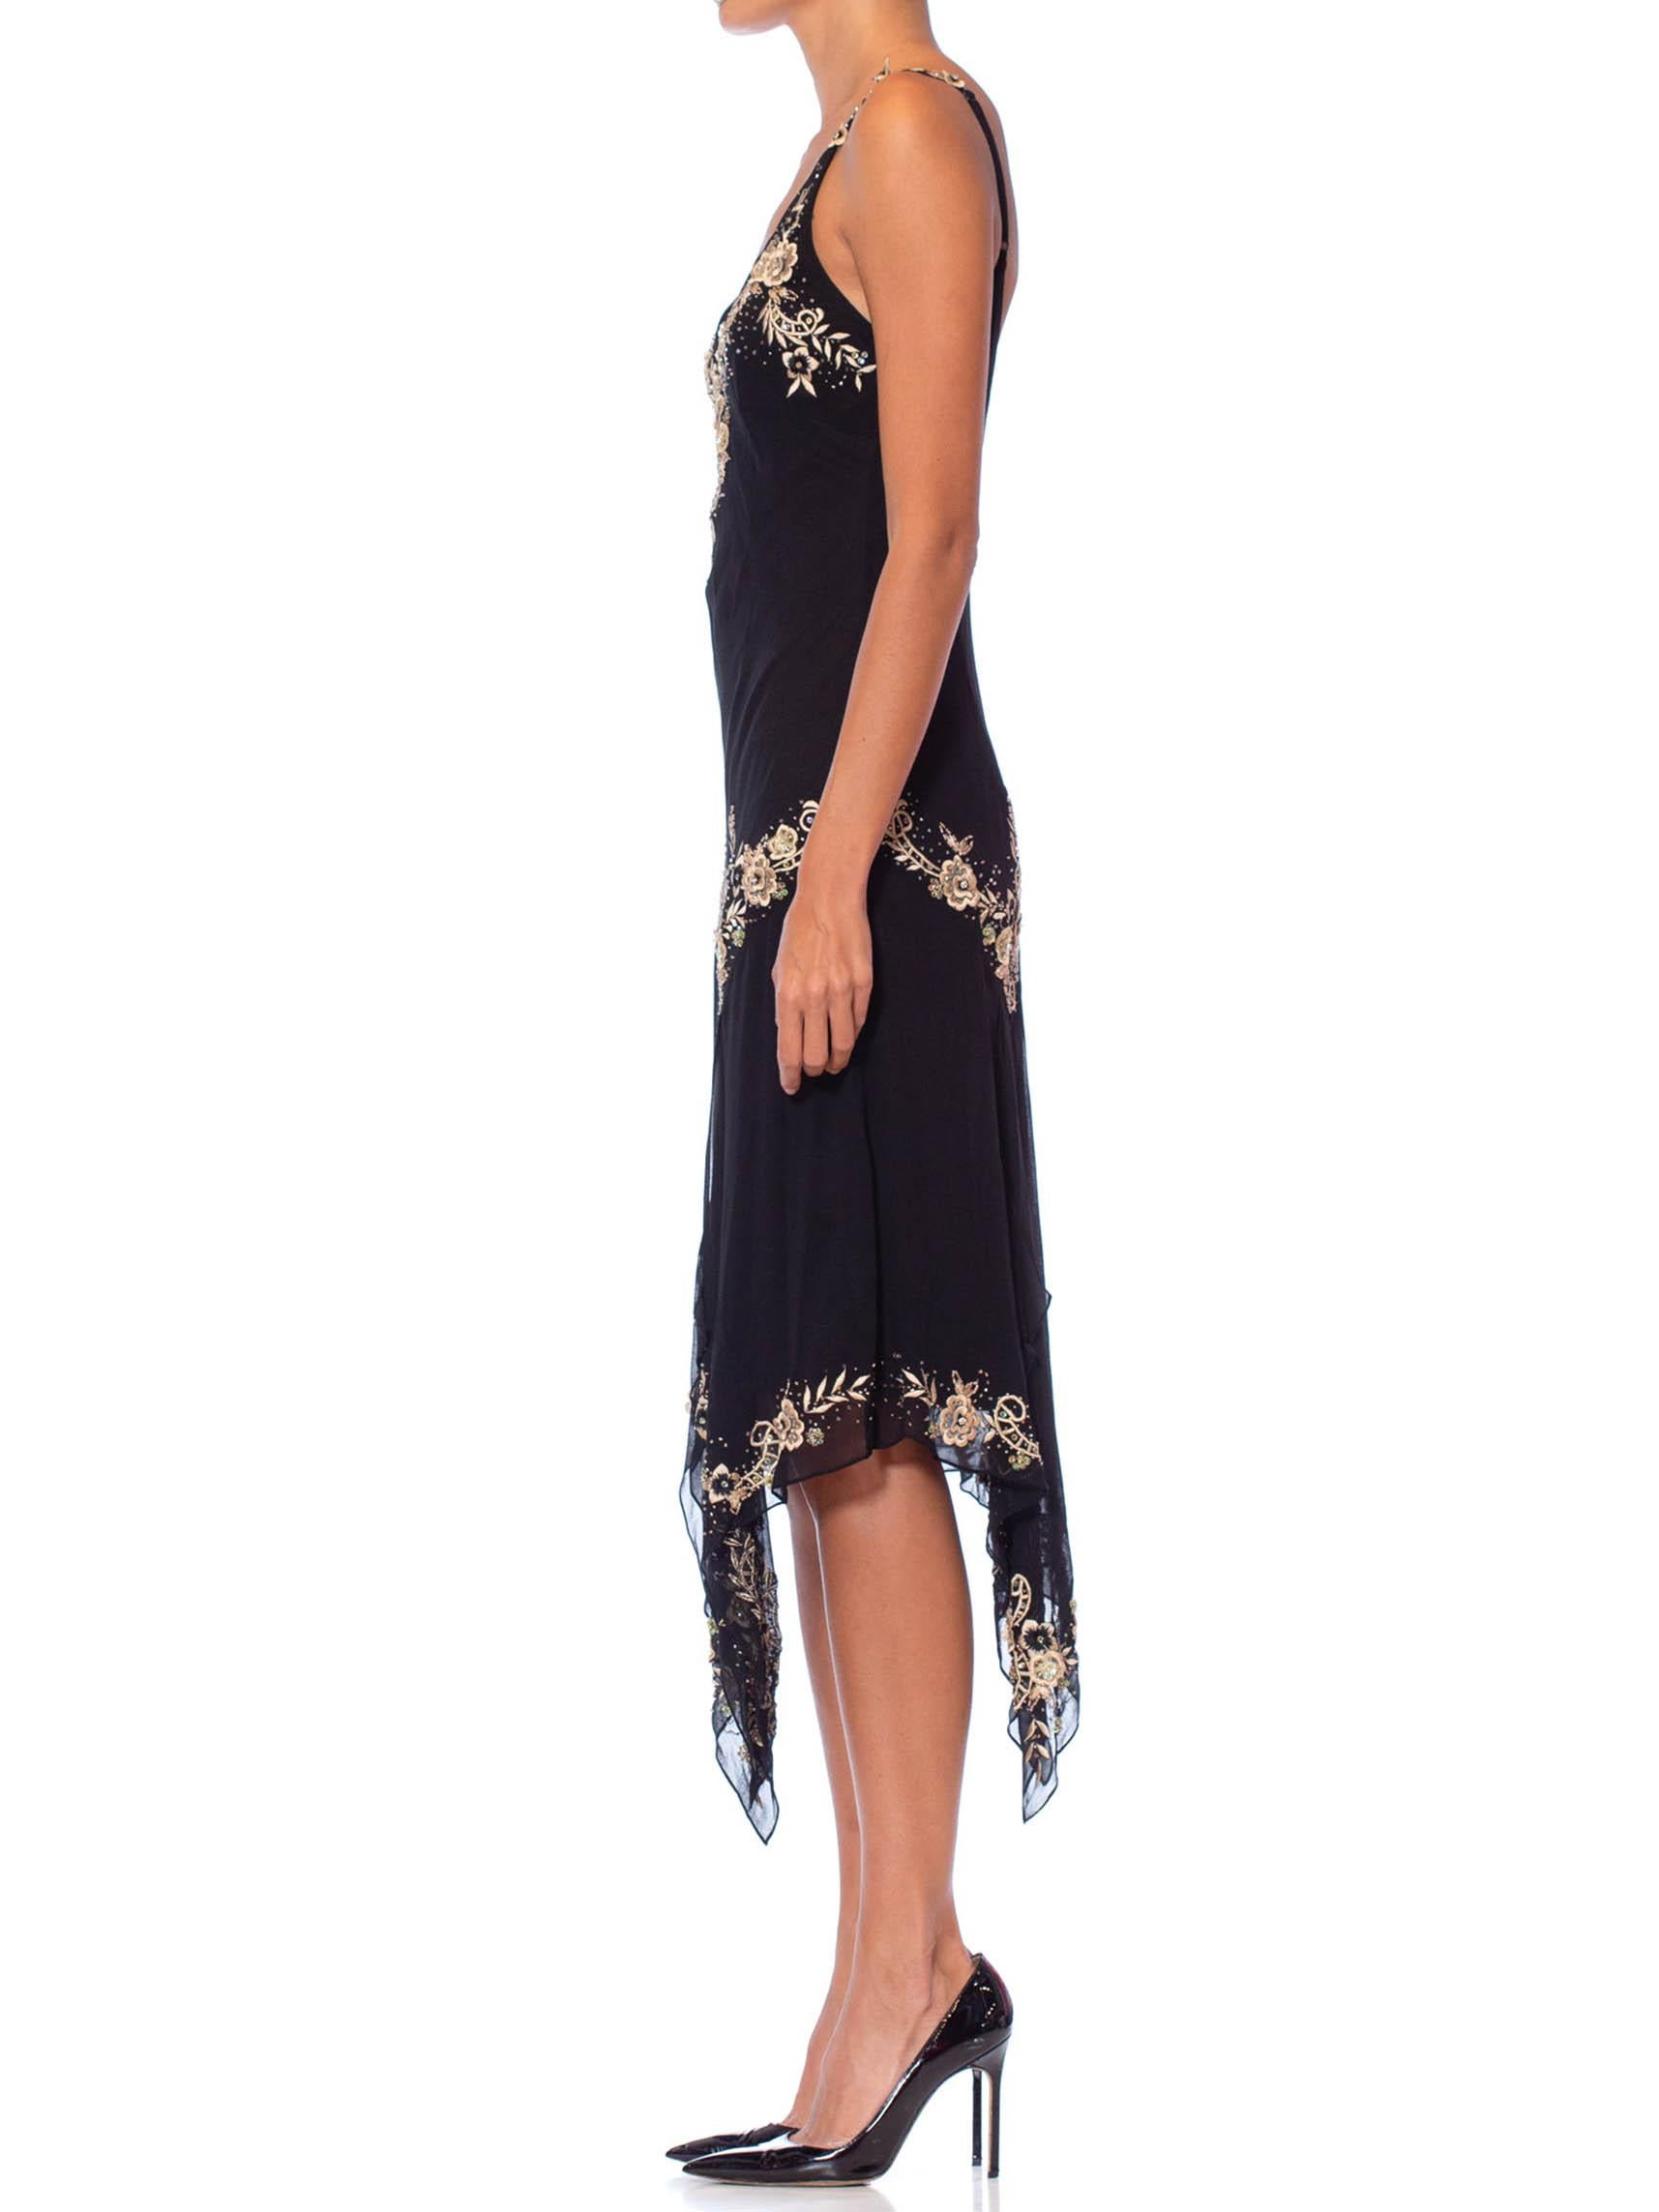 Women's 1990S Black Bias Cut Silk Chiffon Galliano Style Floral Embroidered Dress For Sale